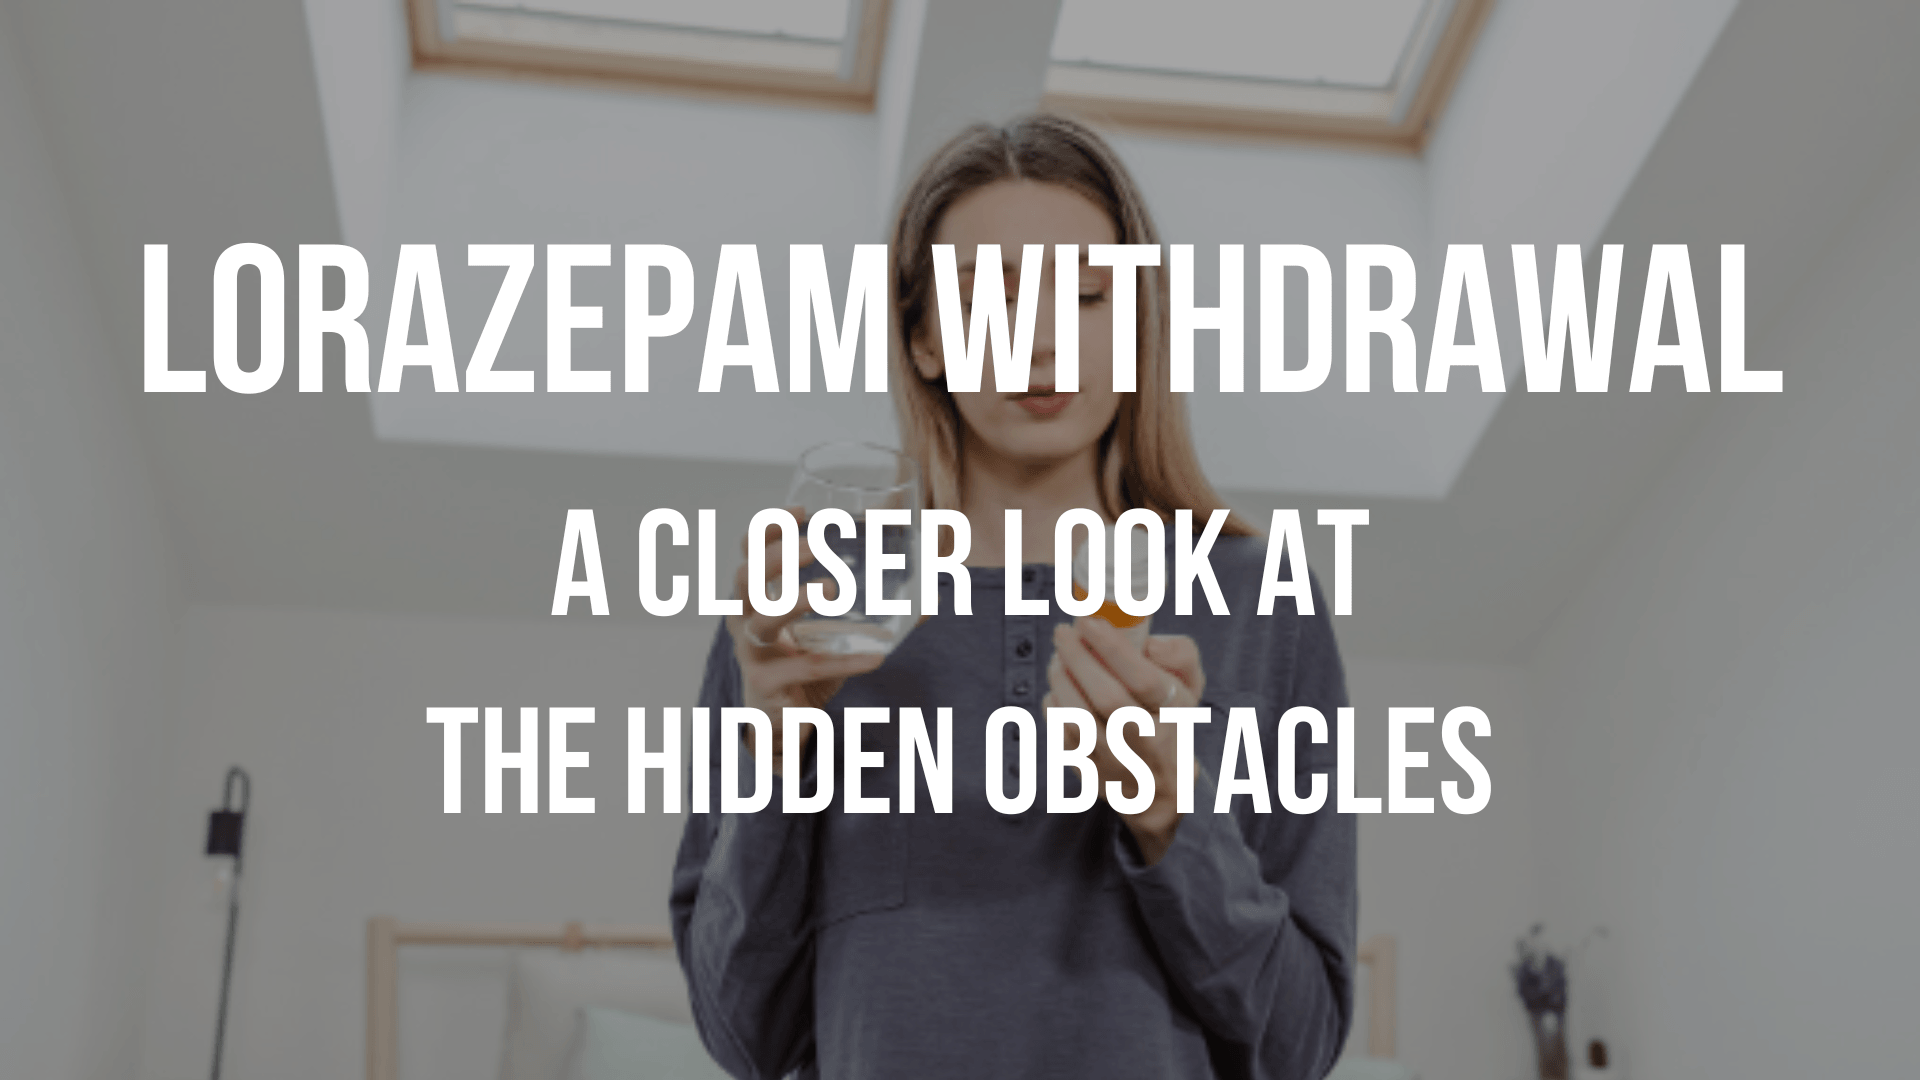 Lorazepam Withdrawal: A Closer Look at the Hidden Obstacles